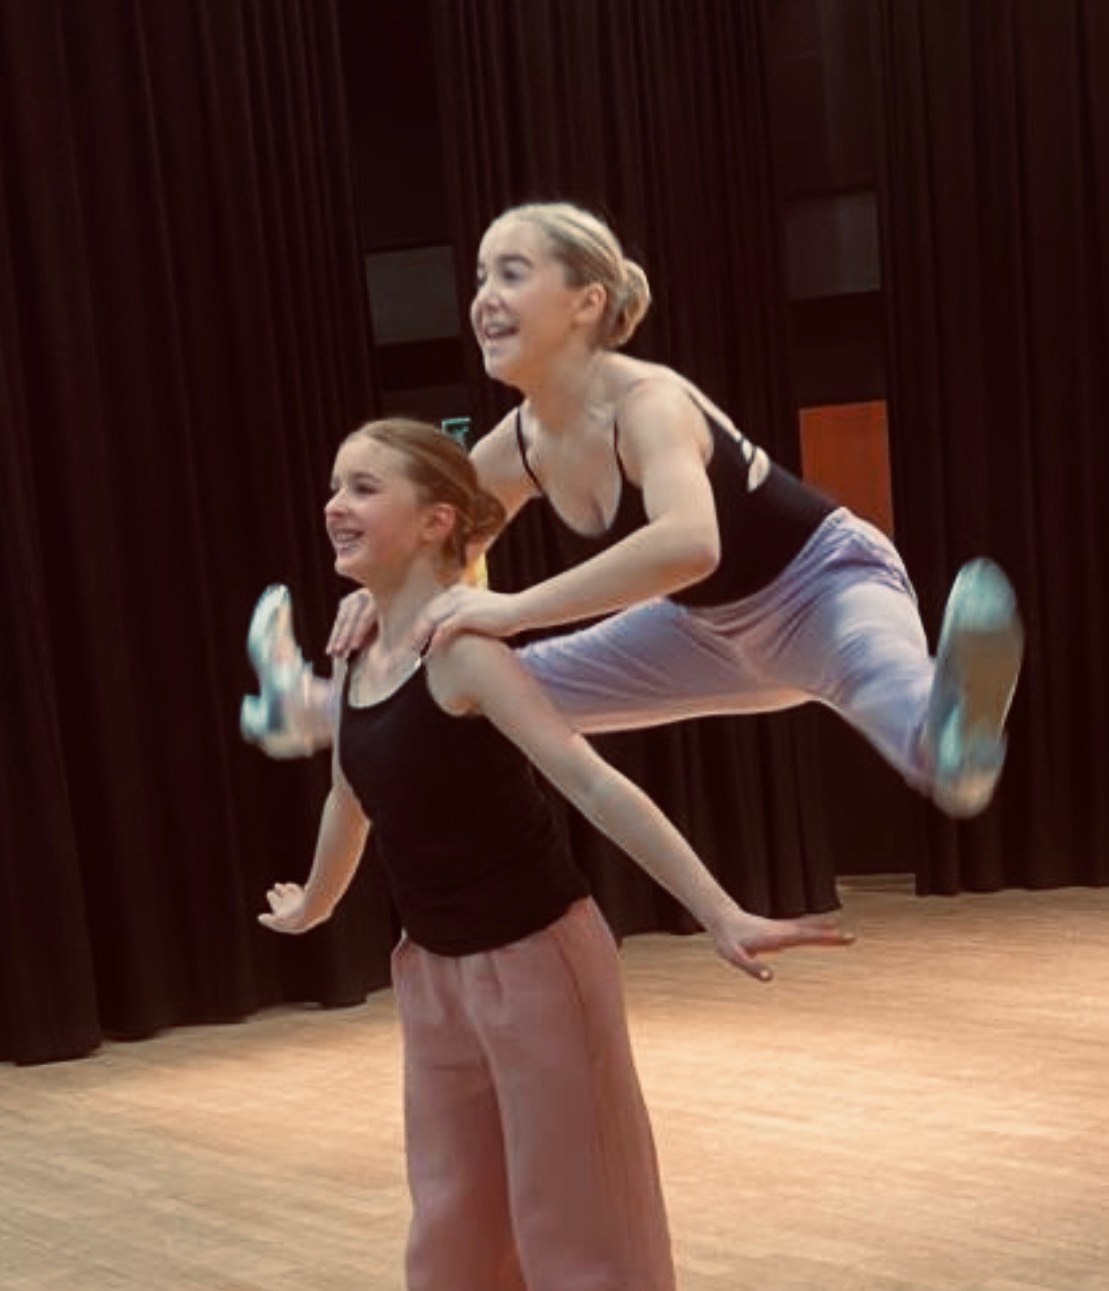 two girls performing a ballet move where one jumps behind the other with legs in splits